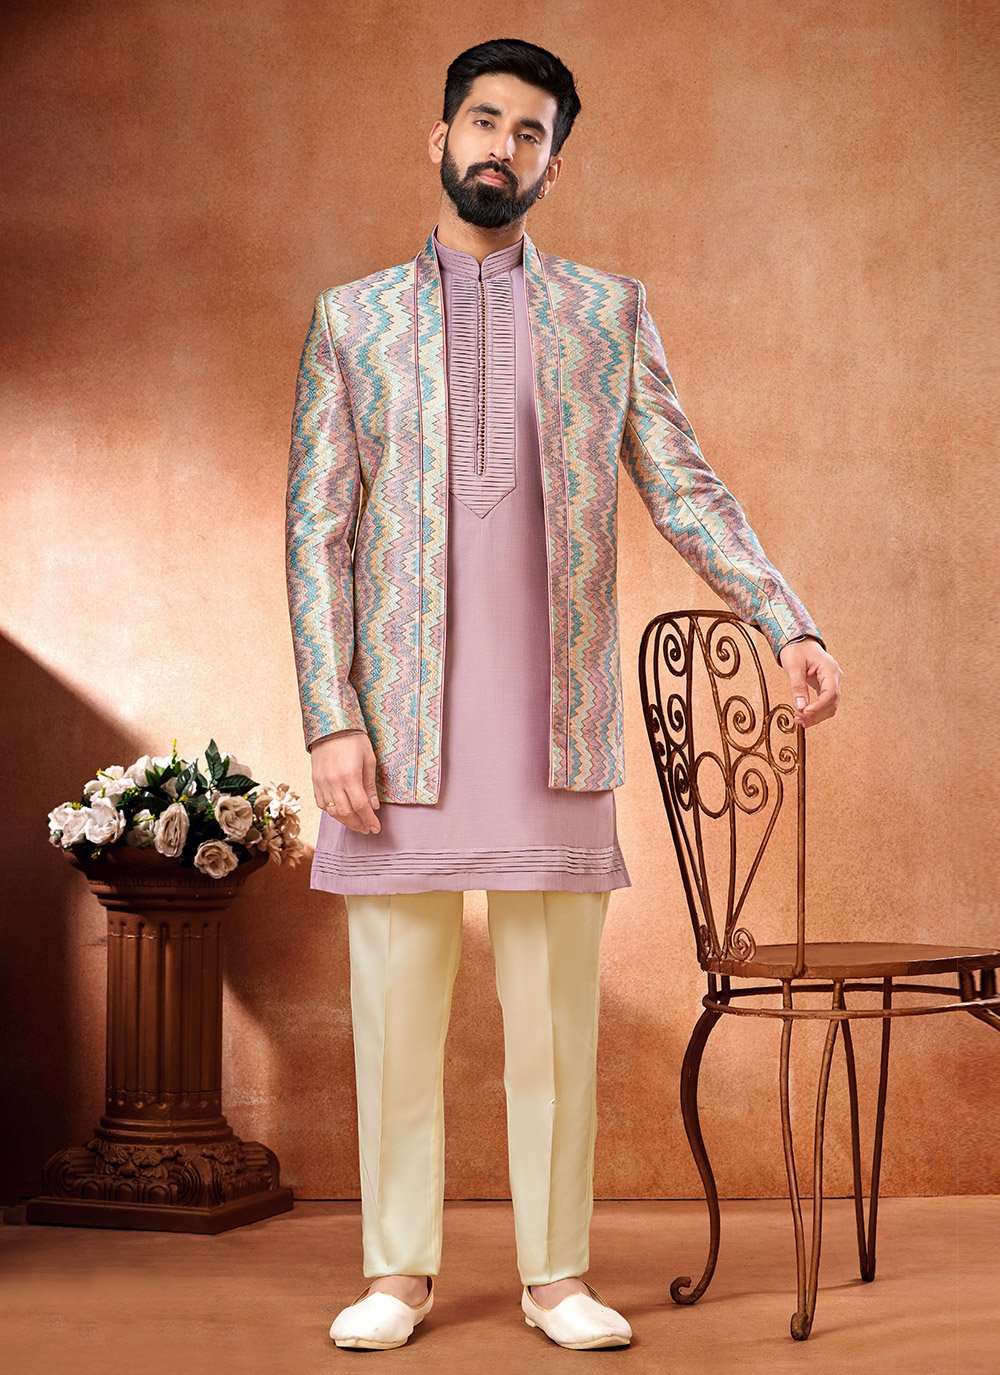 Buy The Rich Look Designer 5 Button Bandhgala/Jodhpuri Suit Casual | Formal  for Men's Available in 5 Size | Bandhgala Suit with Trouser (40, Peach) at  Amazon.in